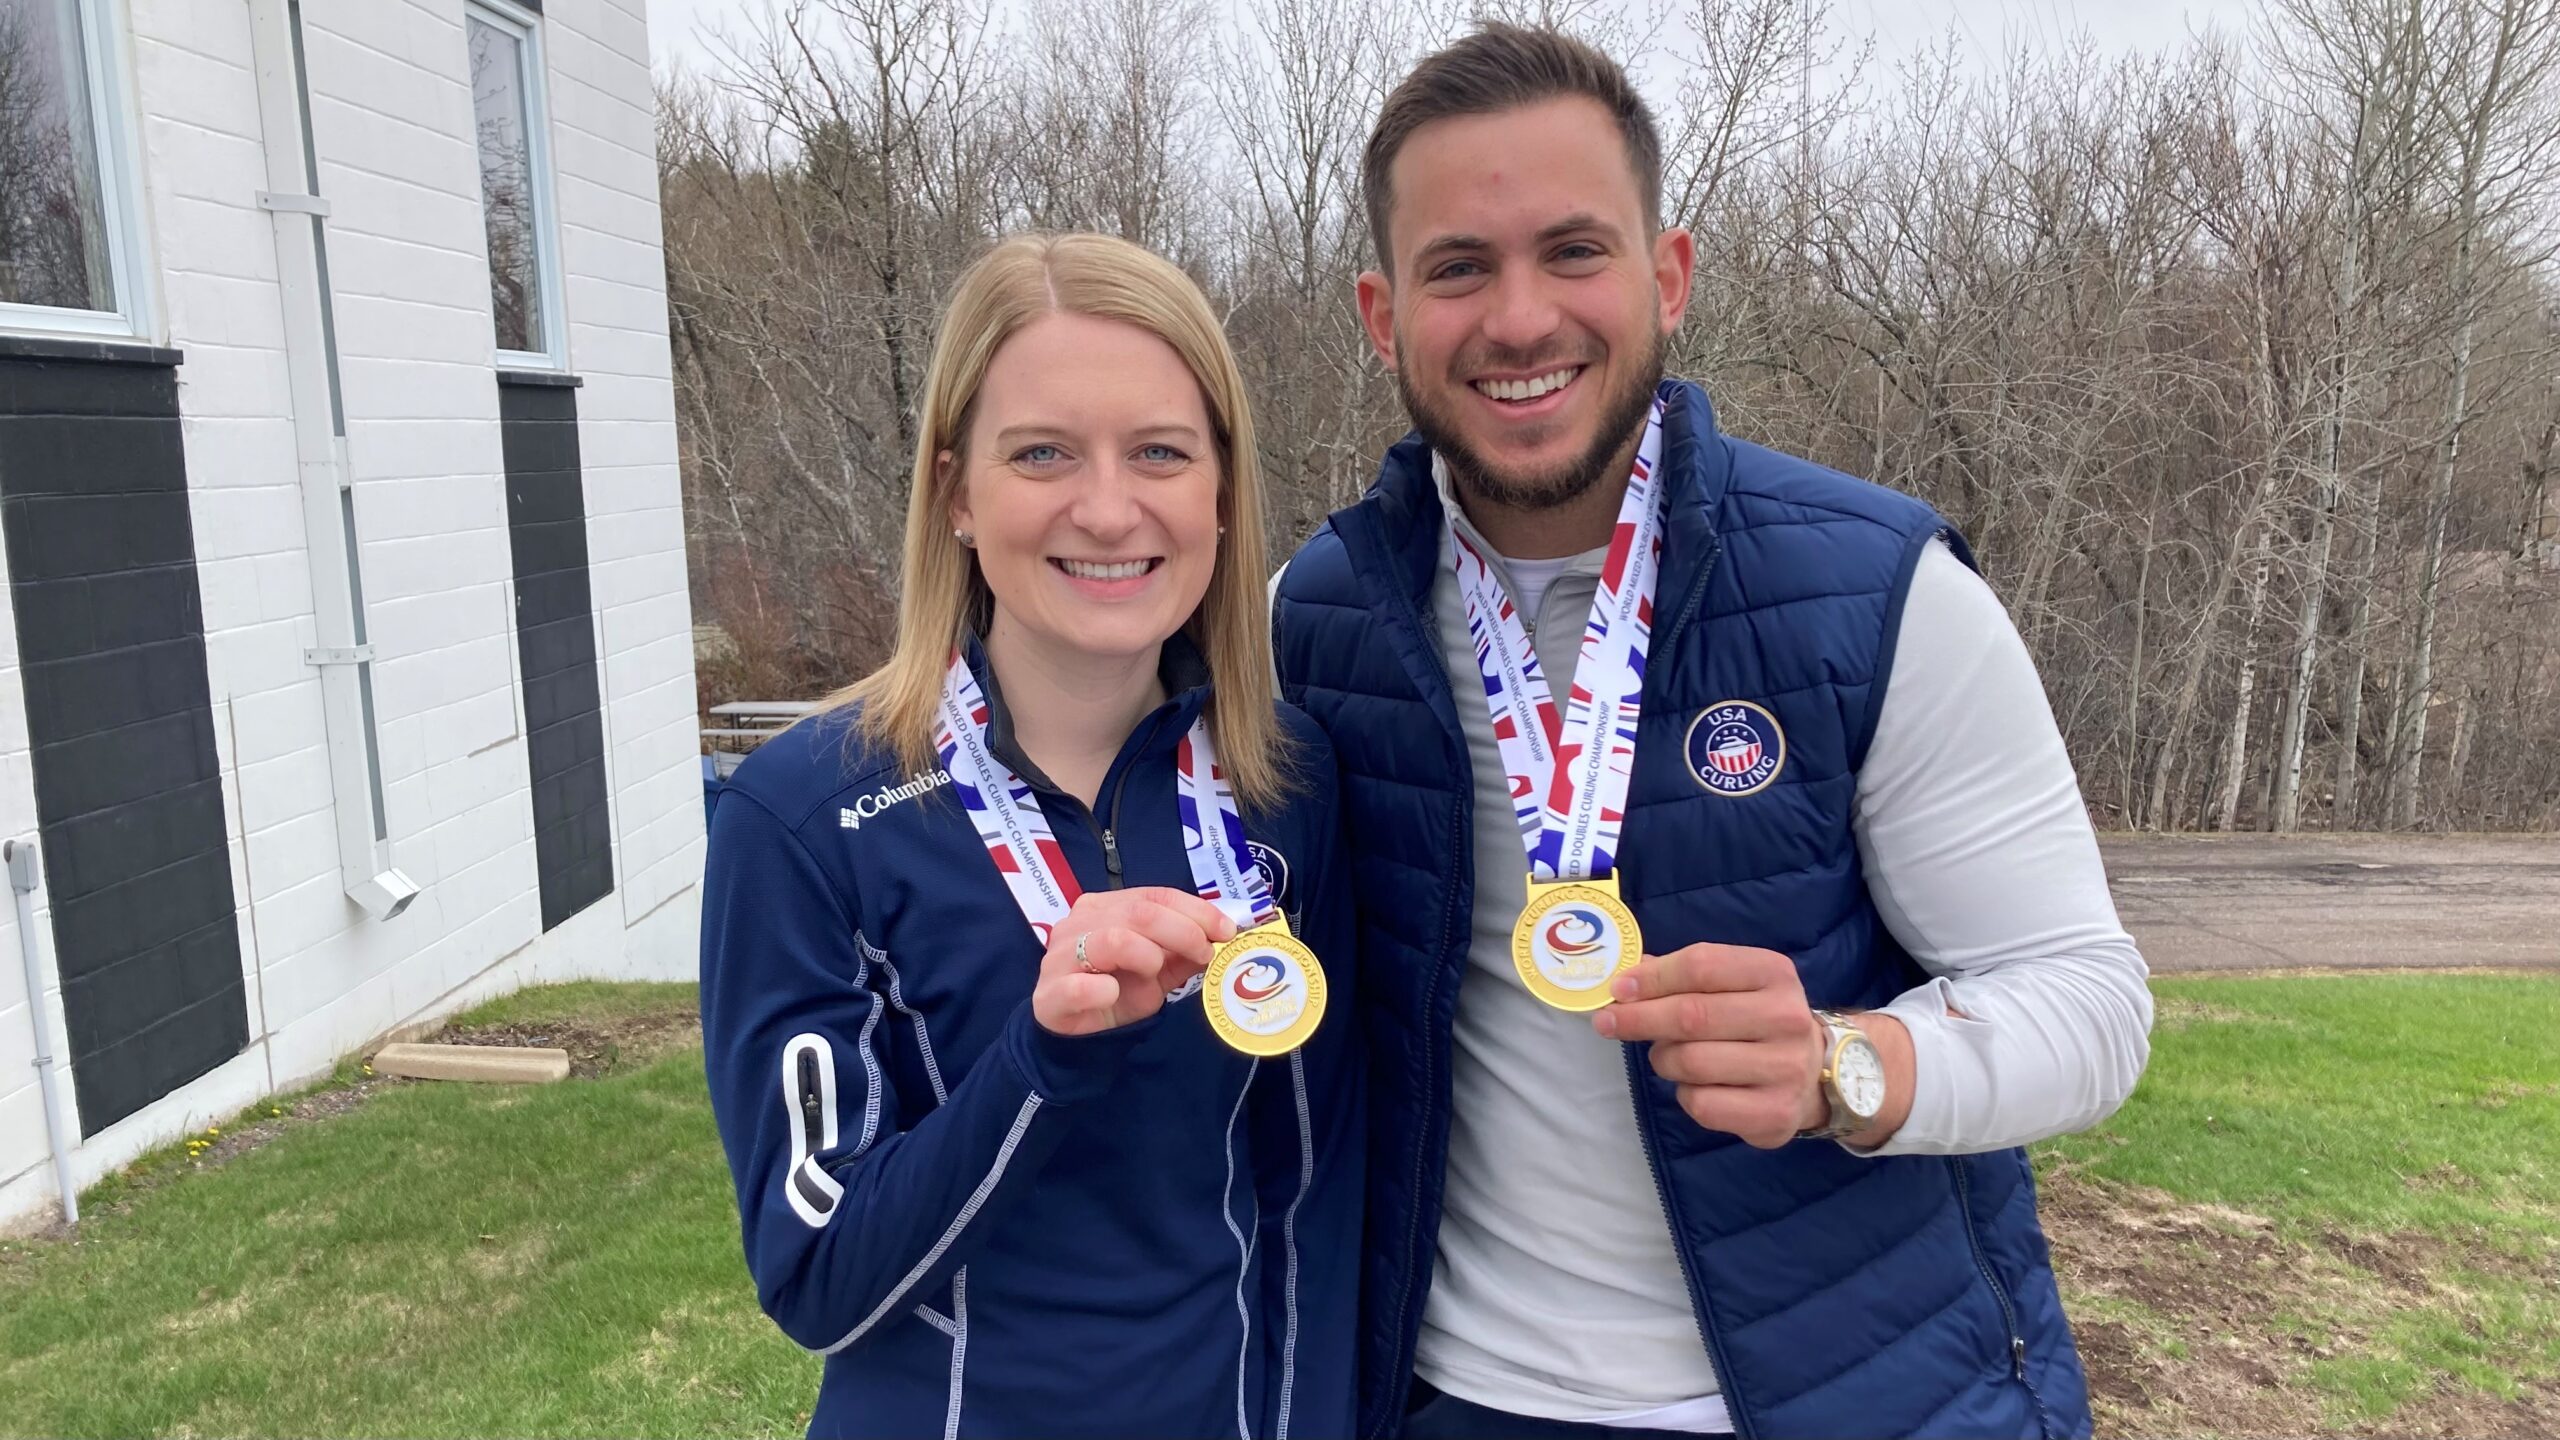 Mixed doubles curling world champions thrilled to bring home the hardware to Duluth